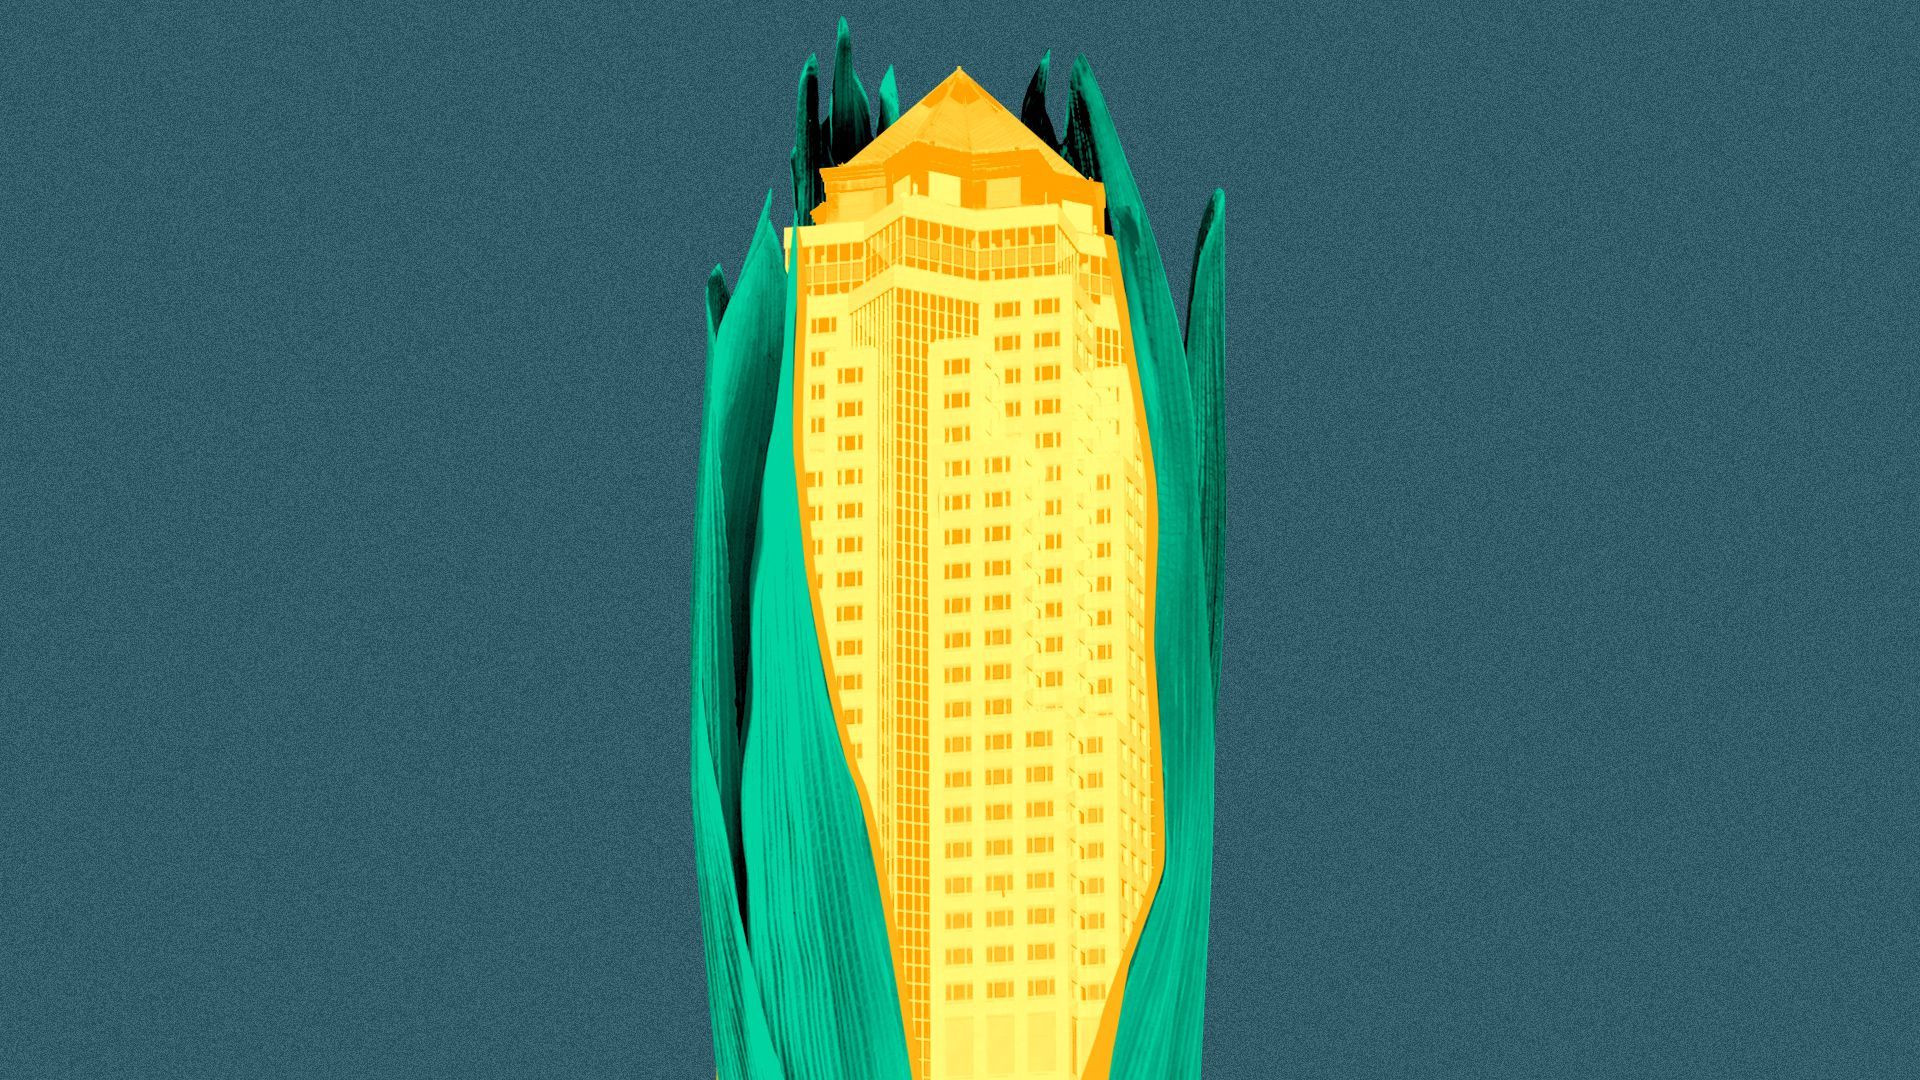 Illustration of the skyscraper 801 Grand, in Des Moines, tinted gold and surrounded by corn husks.